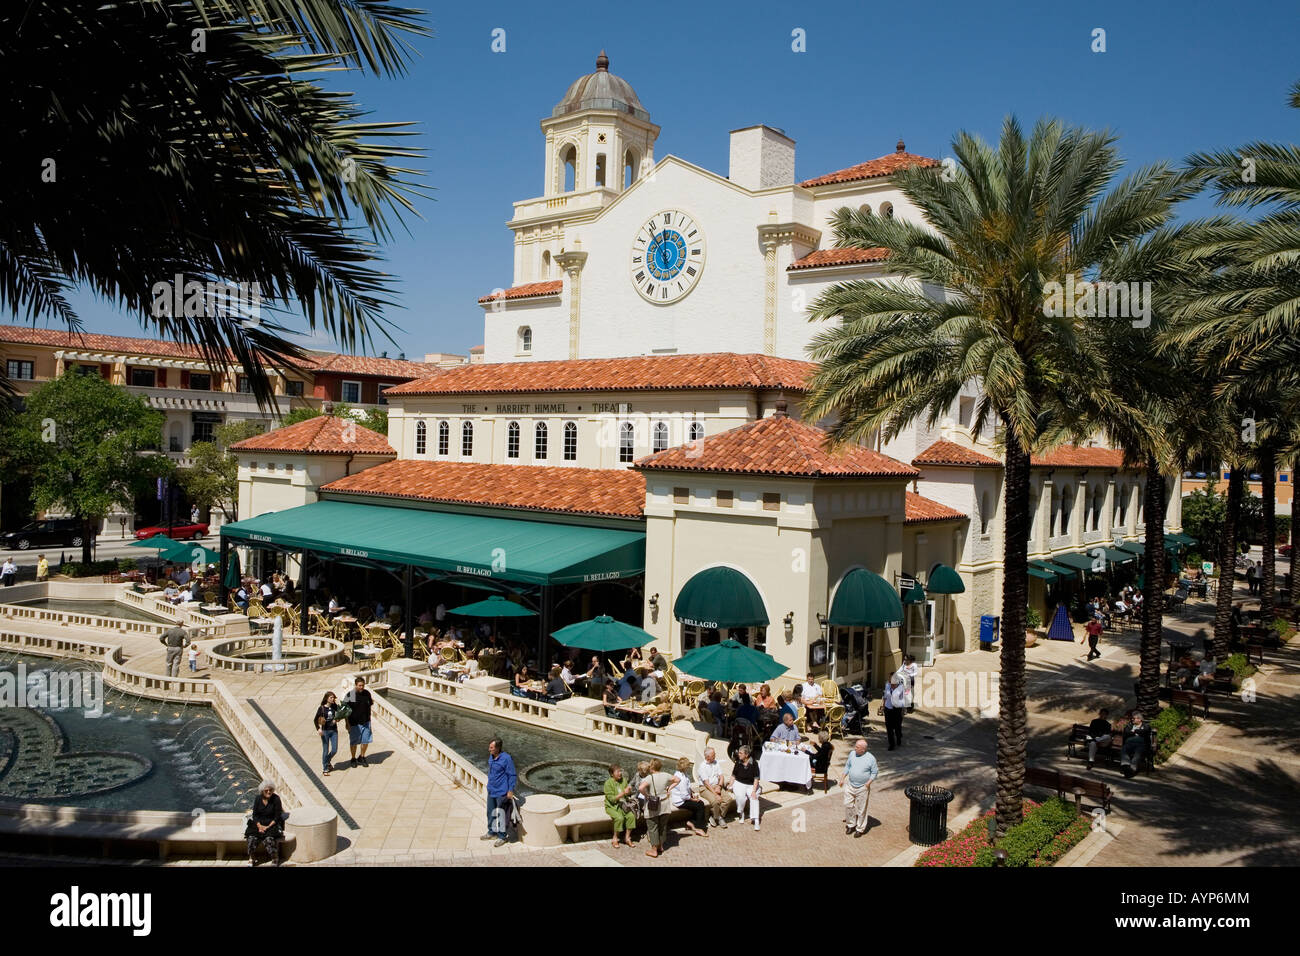 City Place und Harriet Himmell Theater West Palm Beach Florida Stockfoto